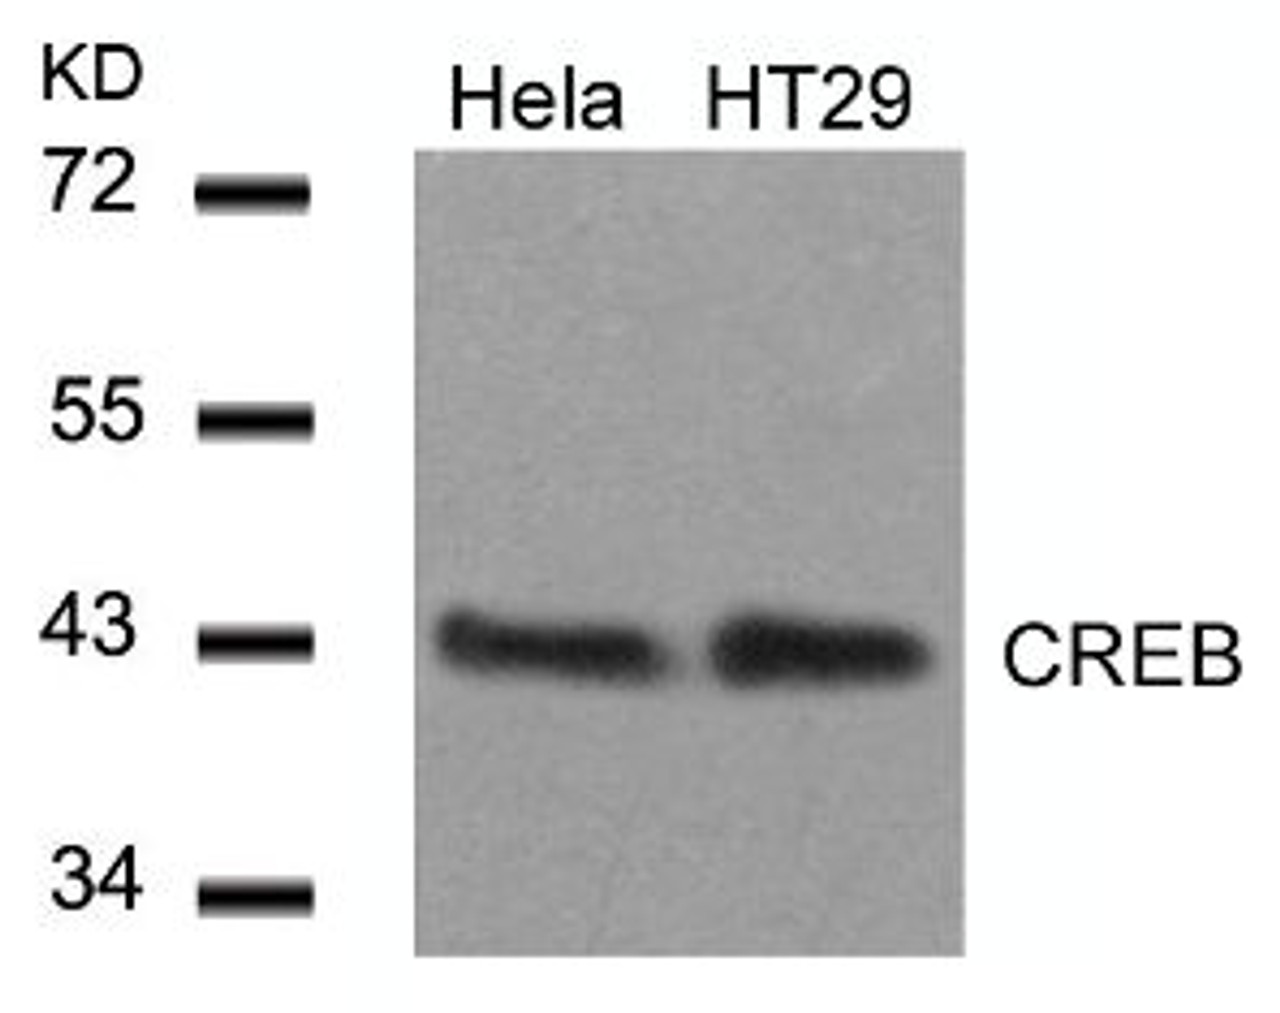 Western blot analysis of lysed extracts from HeLa and HT29 cells using CREB (Ab-129) .